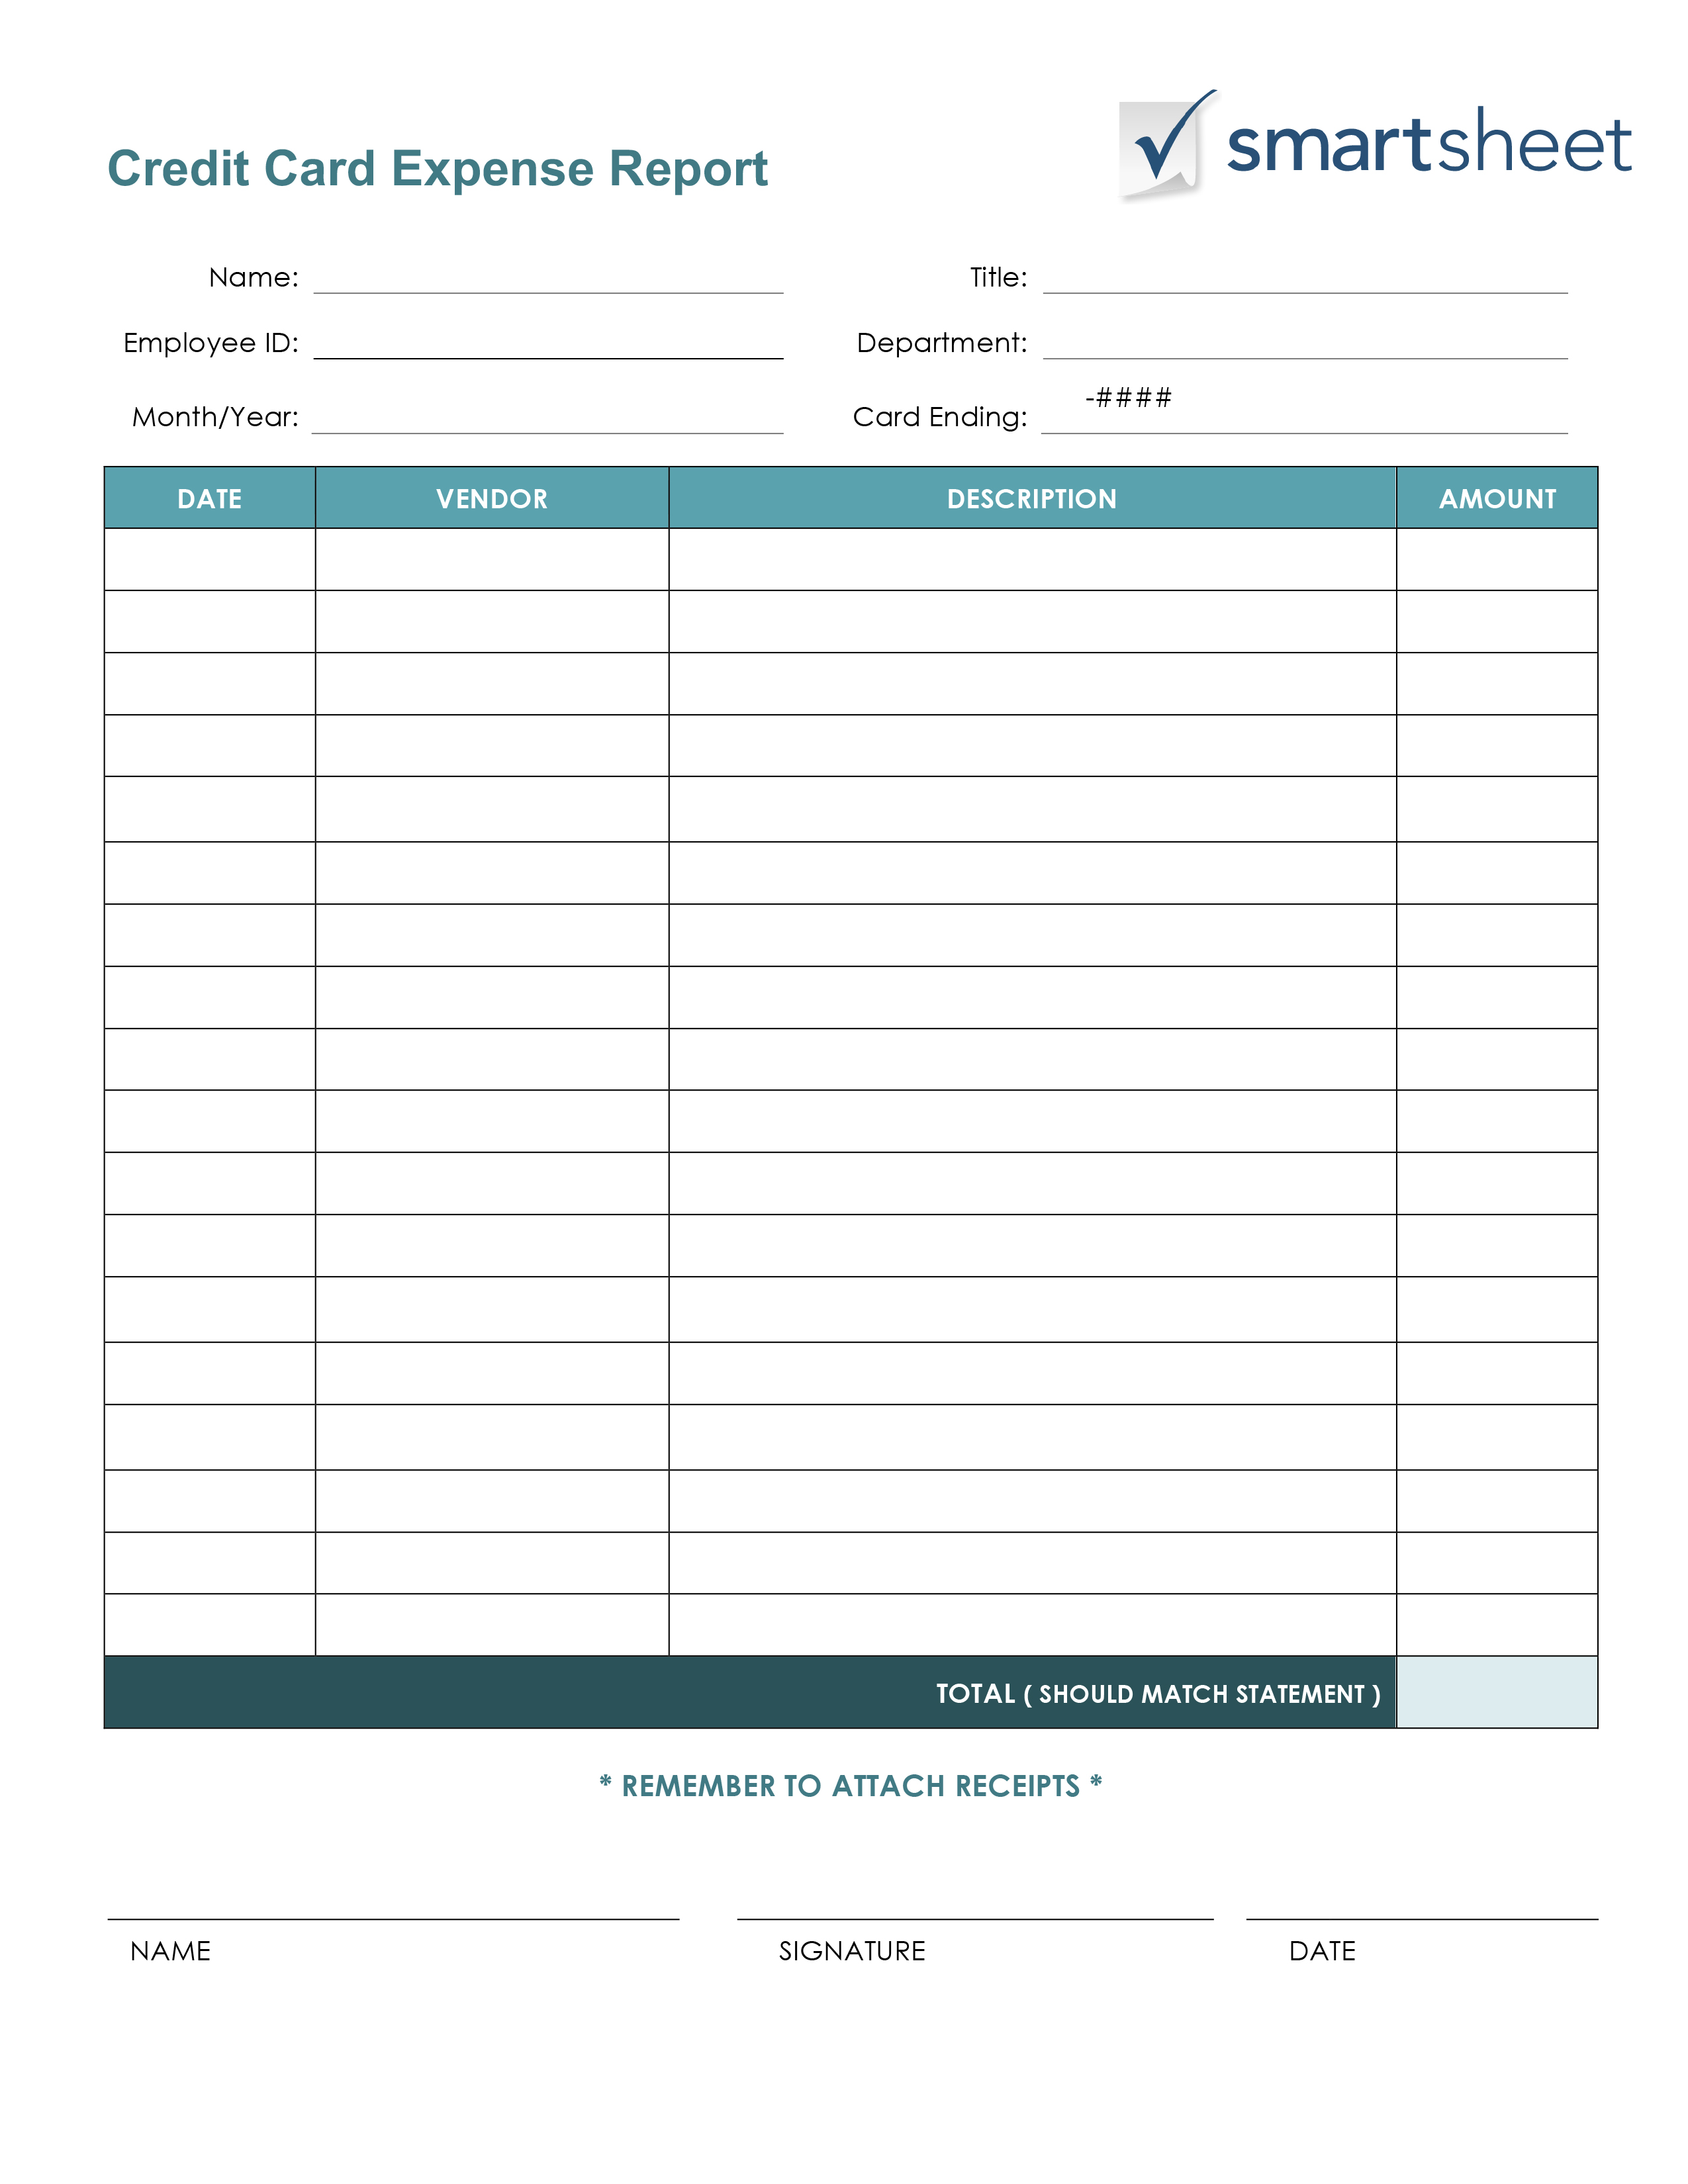 Free Excel Expense Report Template